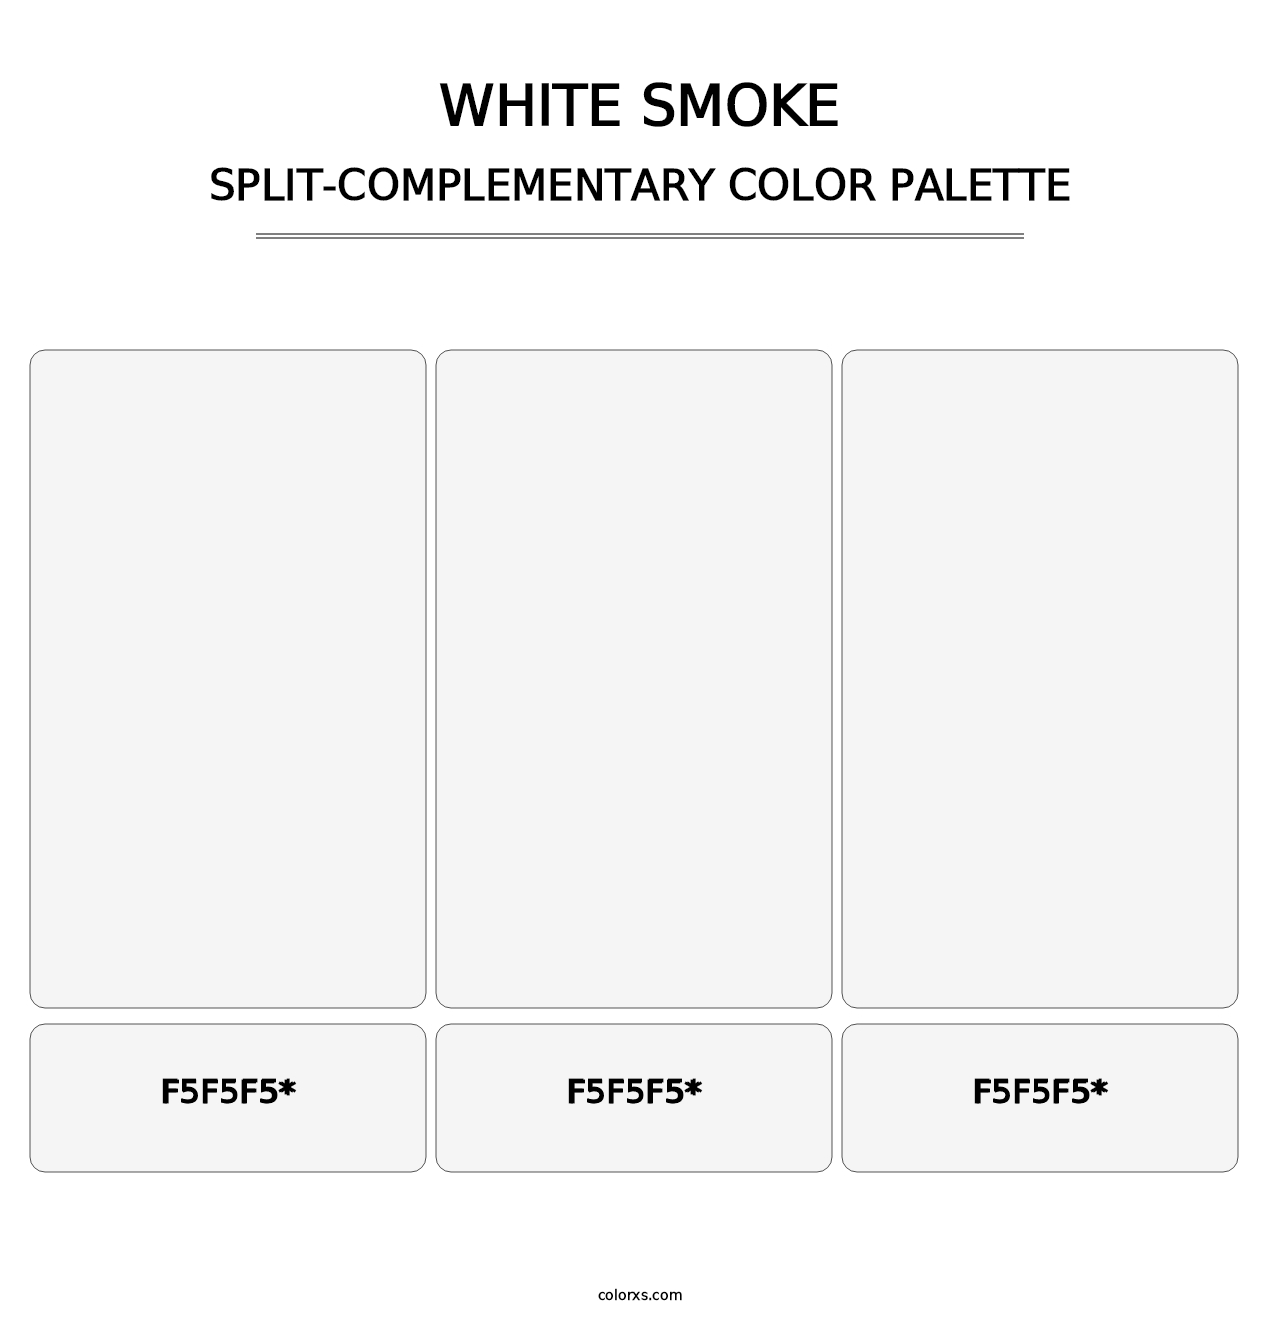 White Smoke - Split-Complementary Color Palette